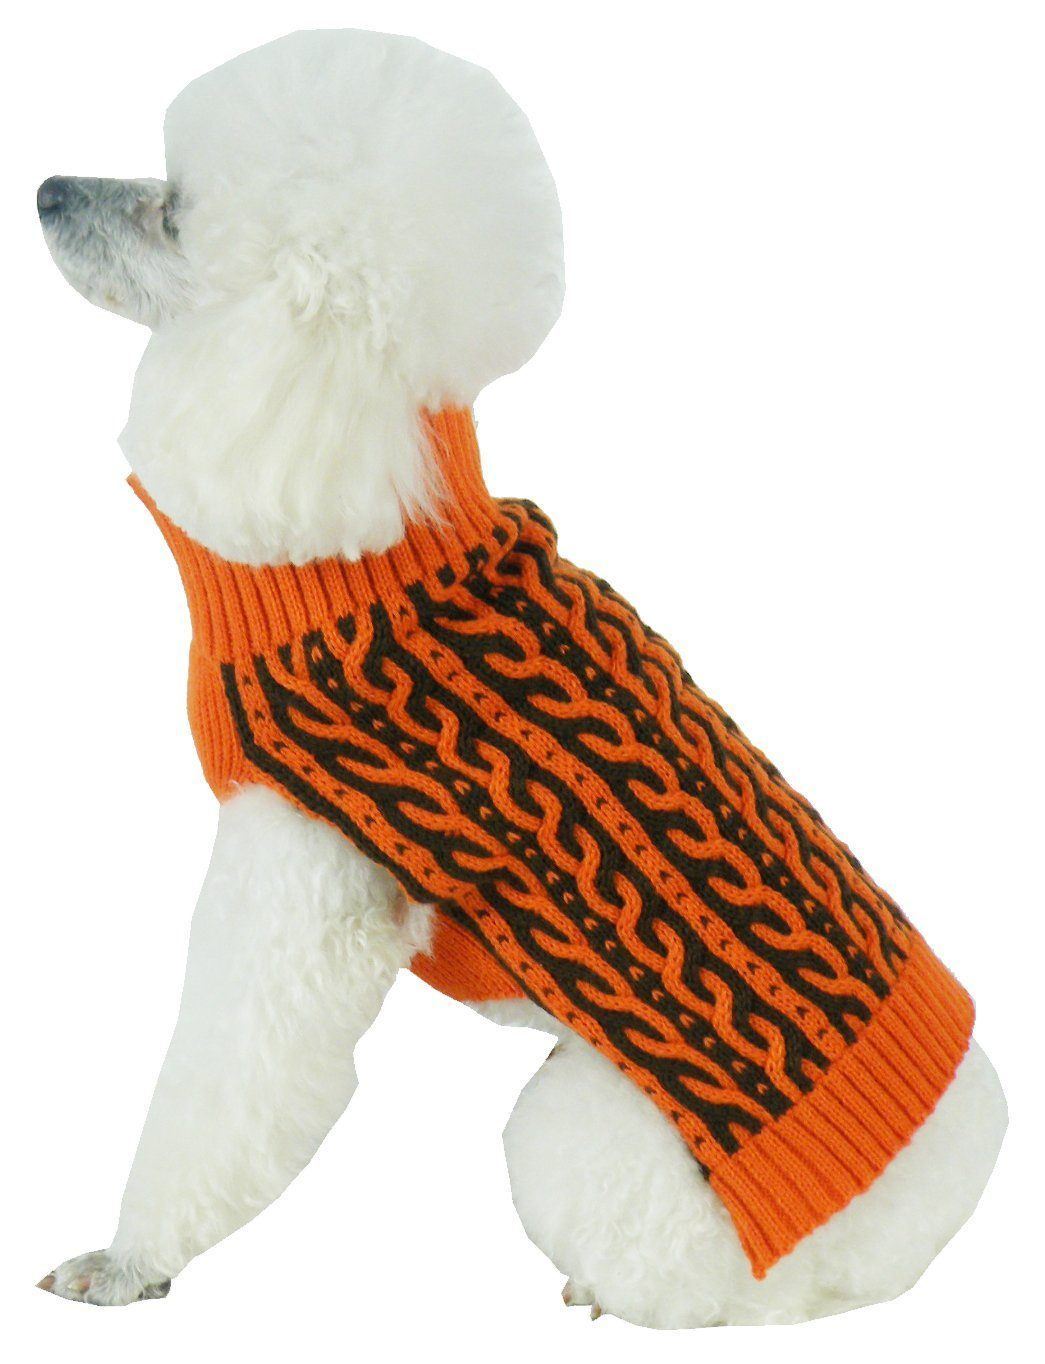 Pet Life ® 'Harmonious' Dual Color Weaved Heavy Cable Knitted Fashion Designer Dog Sweater X-Small Orange And Brown